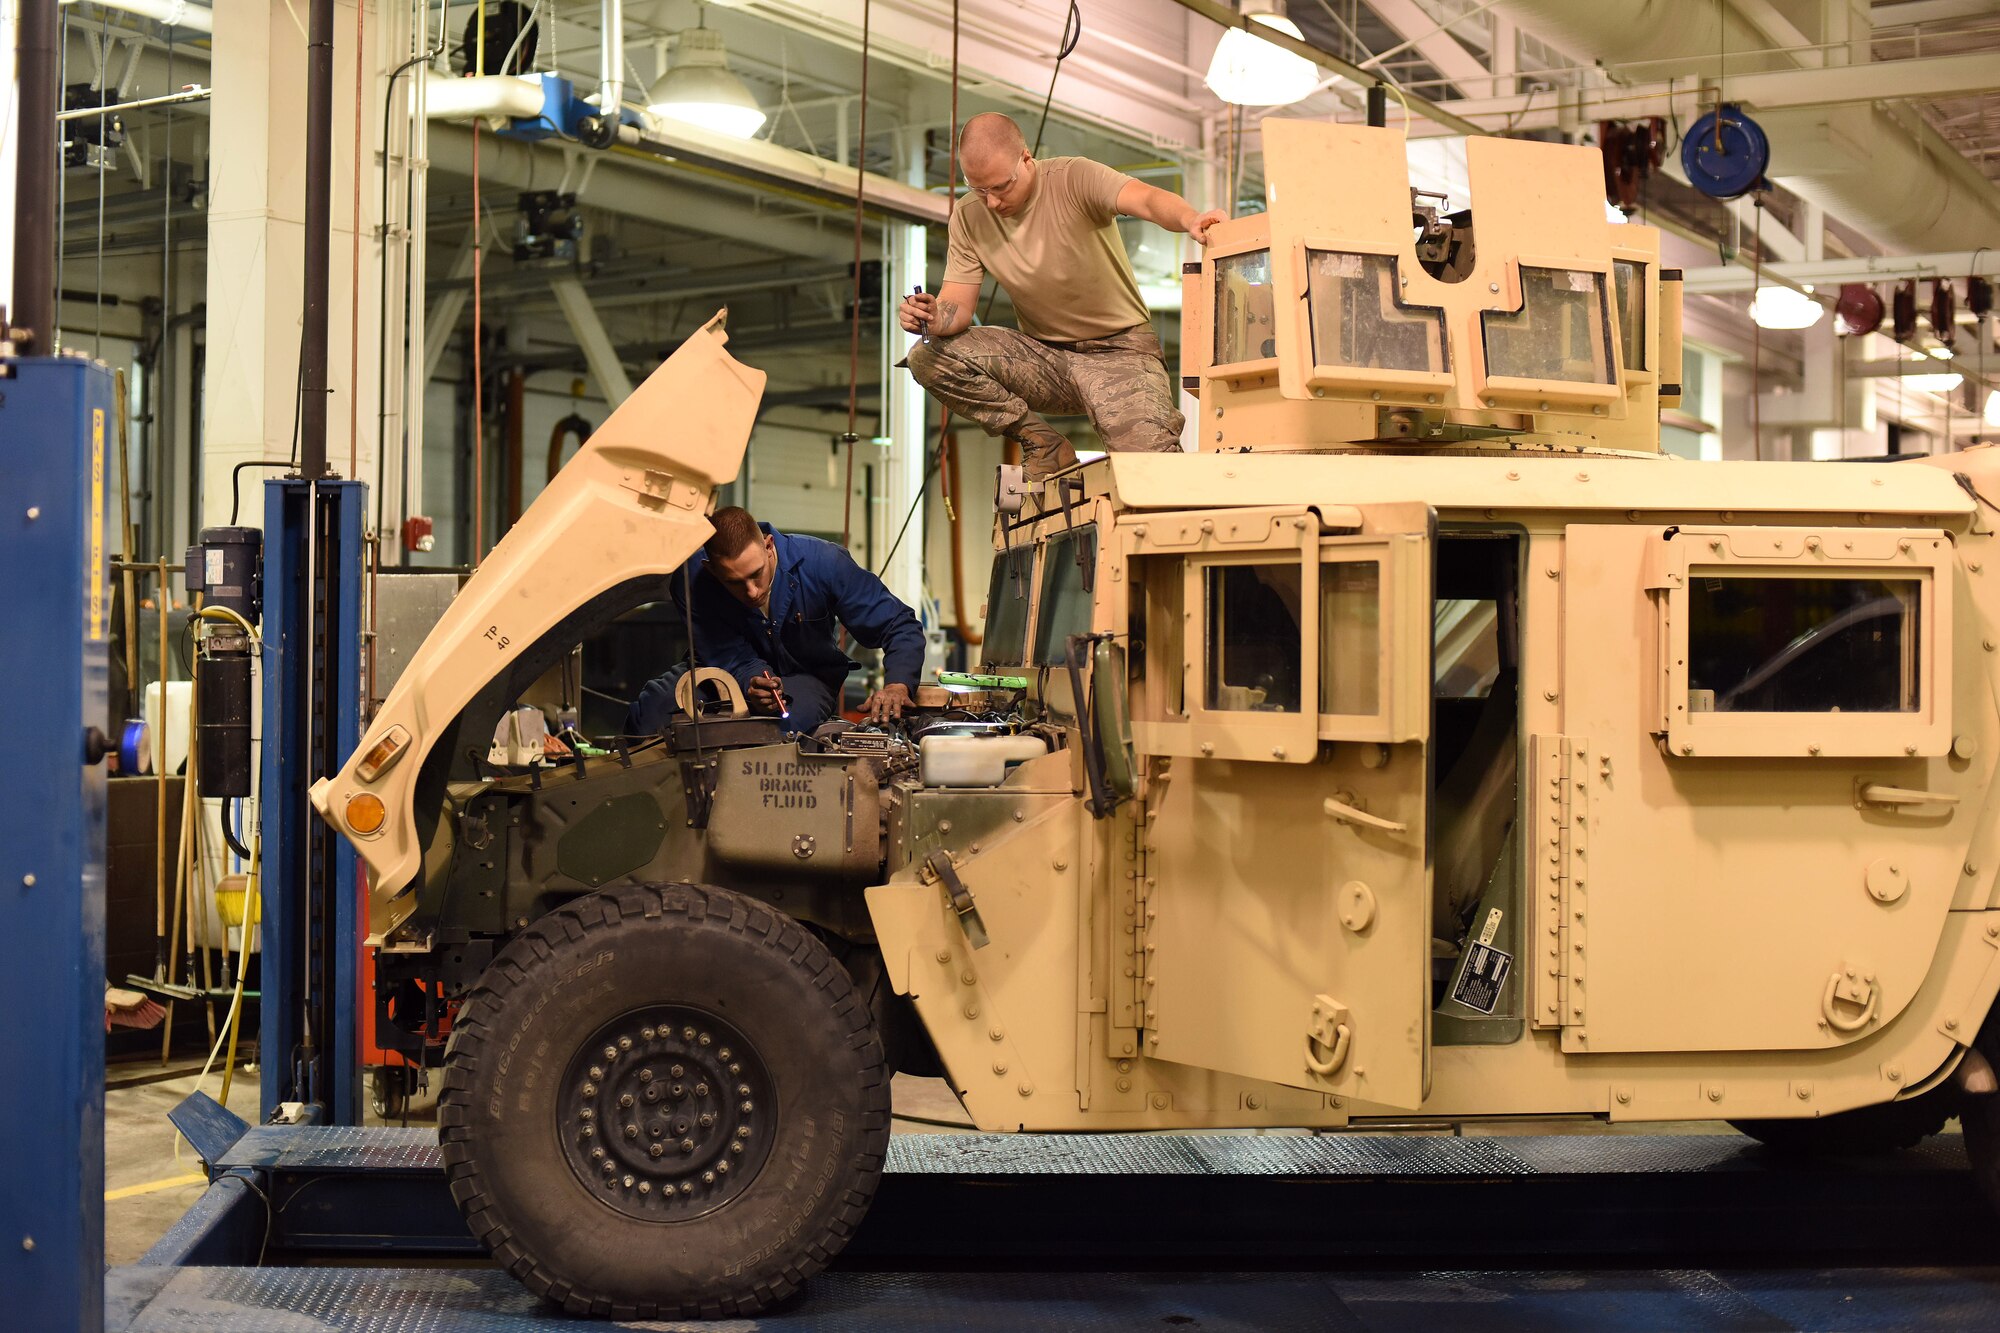 Senior Airman Elliott Packingham, 341st Logistics Readiness Squadron fleet management analyst, shines a light for Senior Airman Zachary Simmons, 341st LRS vehicle maintenance journeyman, as he makes repairs to a Humvee during exercise GLOBAL THUNDER 16, Nov. 6, 2015 at Malmstrom Air Force Base, Mont. The 341st LRS is part of U.S. Strategic Command’s (USSTRATCOM) Task Force 214 and supports the command’s strategic deterrence mission by operating and maintaining the Air Force’s Intercontinental Ballistic Missile force. GLOBAL THUNDER is an annual U.S. Strategic Command training event that assesses command and control functionality in all USSTRATCOM mission areas and affords component commands a venue to evaluate their joint operational readiness. Planning for GLOBAL THUNDER 16 has been under way for more than a year and is based on a notional scenario with fictitious adversaries. USSTRATCOM, one of nine DoD unified combatant commands, relies on various task forces for the execution of its global missions, which also include space operations; cyberspace operations; joint electronic warfare; global strike; missile defense; intelligence, surveillance and reconnaissance; combating weapons of mass destruction; and analysis and targeting. (U.S. Air Force photo by Airman Collin Schmidt) 